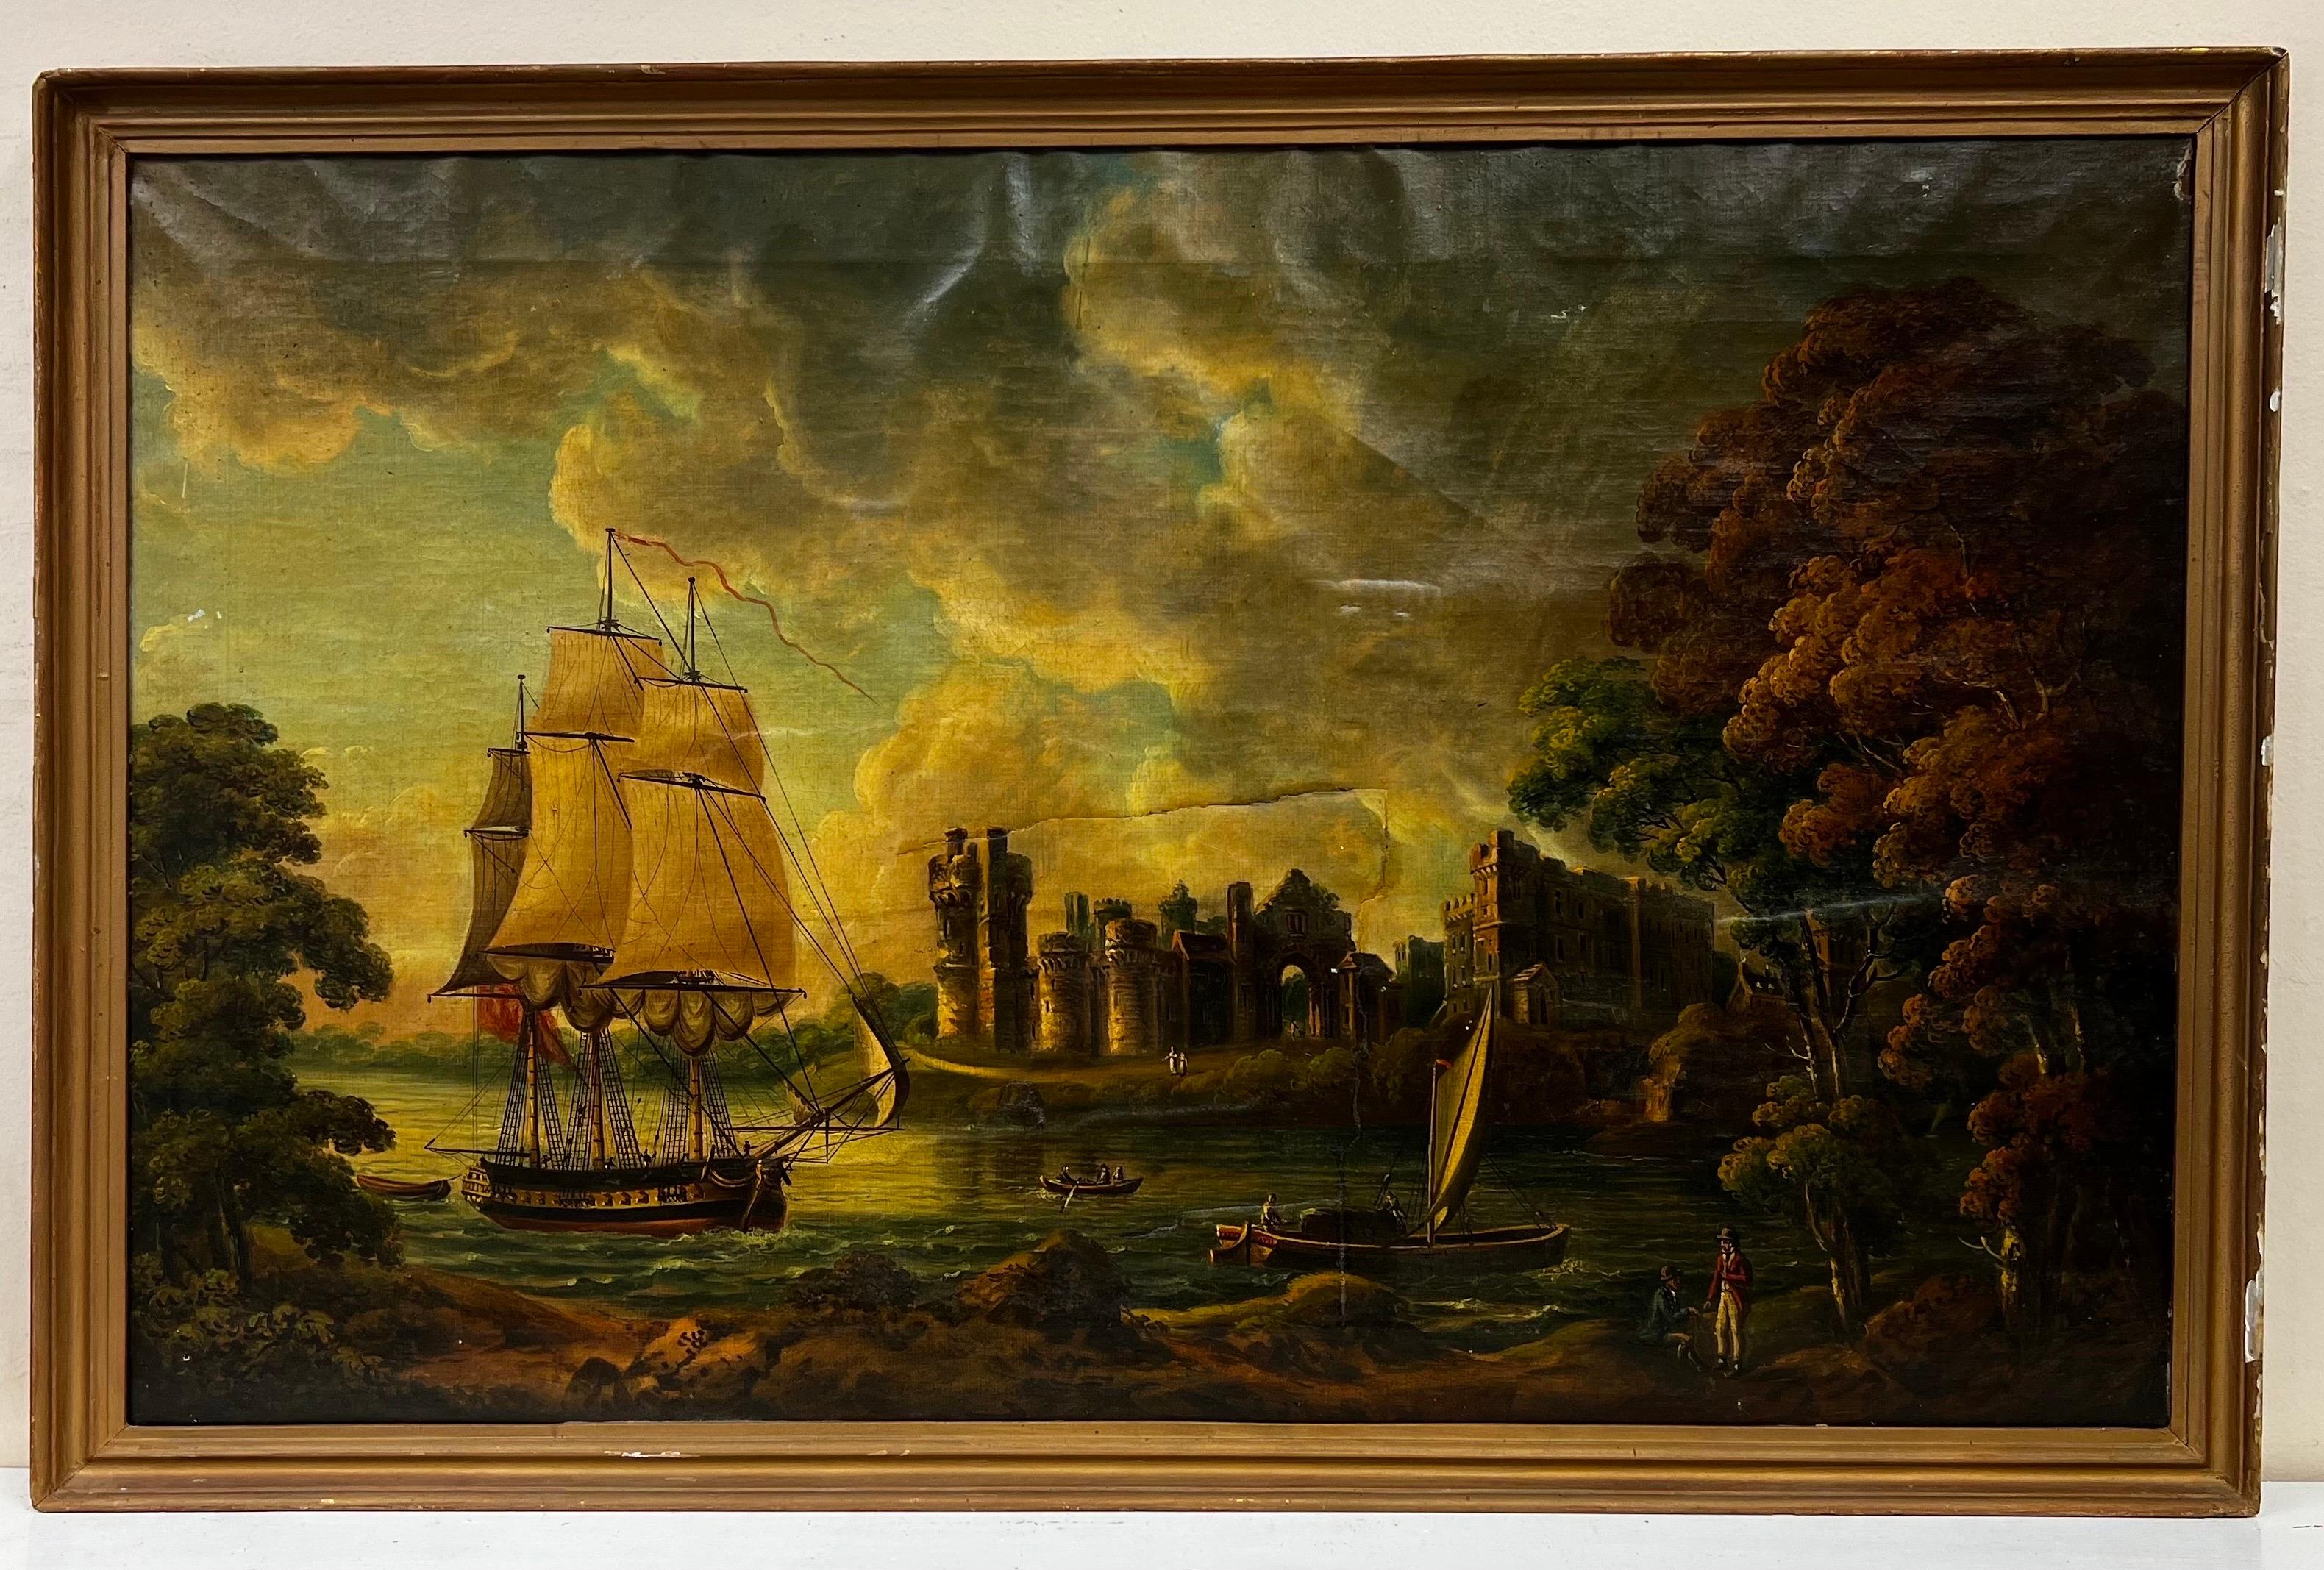 Artist/ School: Dutch School, early 1800's period

Title: Trading estuary with shipping

Medium: oil on canvas, framed 

Framed: 26.5 x 40.5 inches
Canvas : 23.5 x 38 inches

Provenance: private collection, England

Condition: The painting is